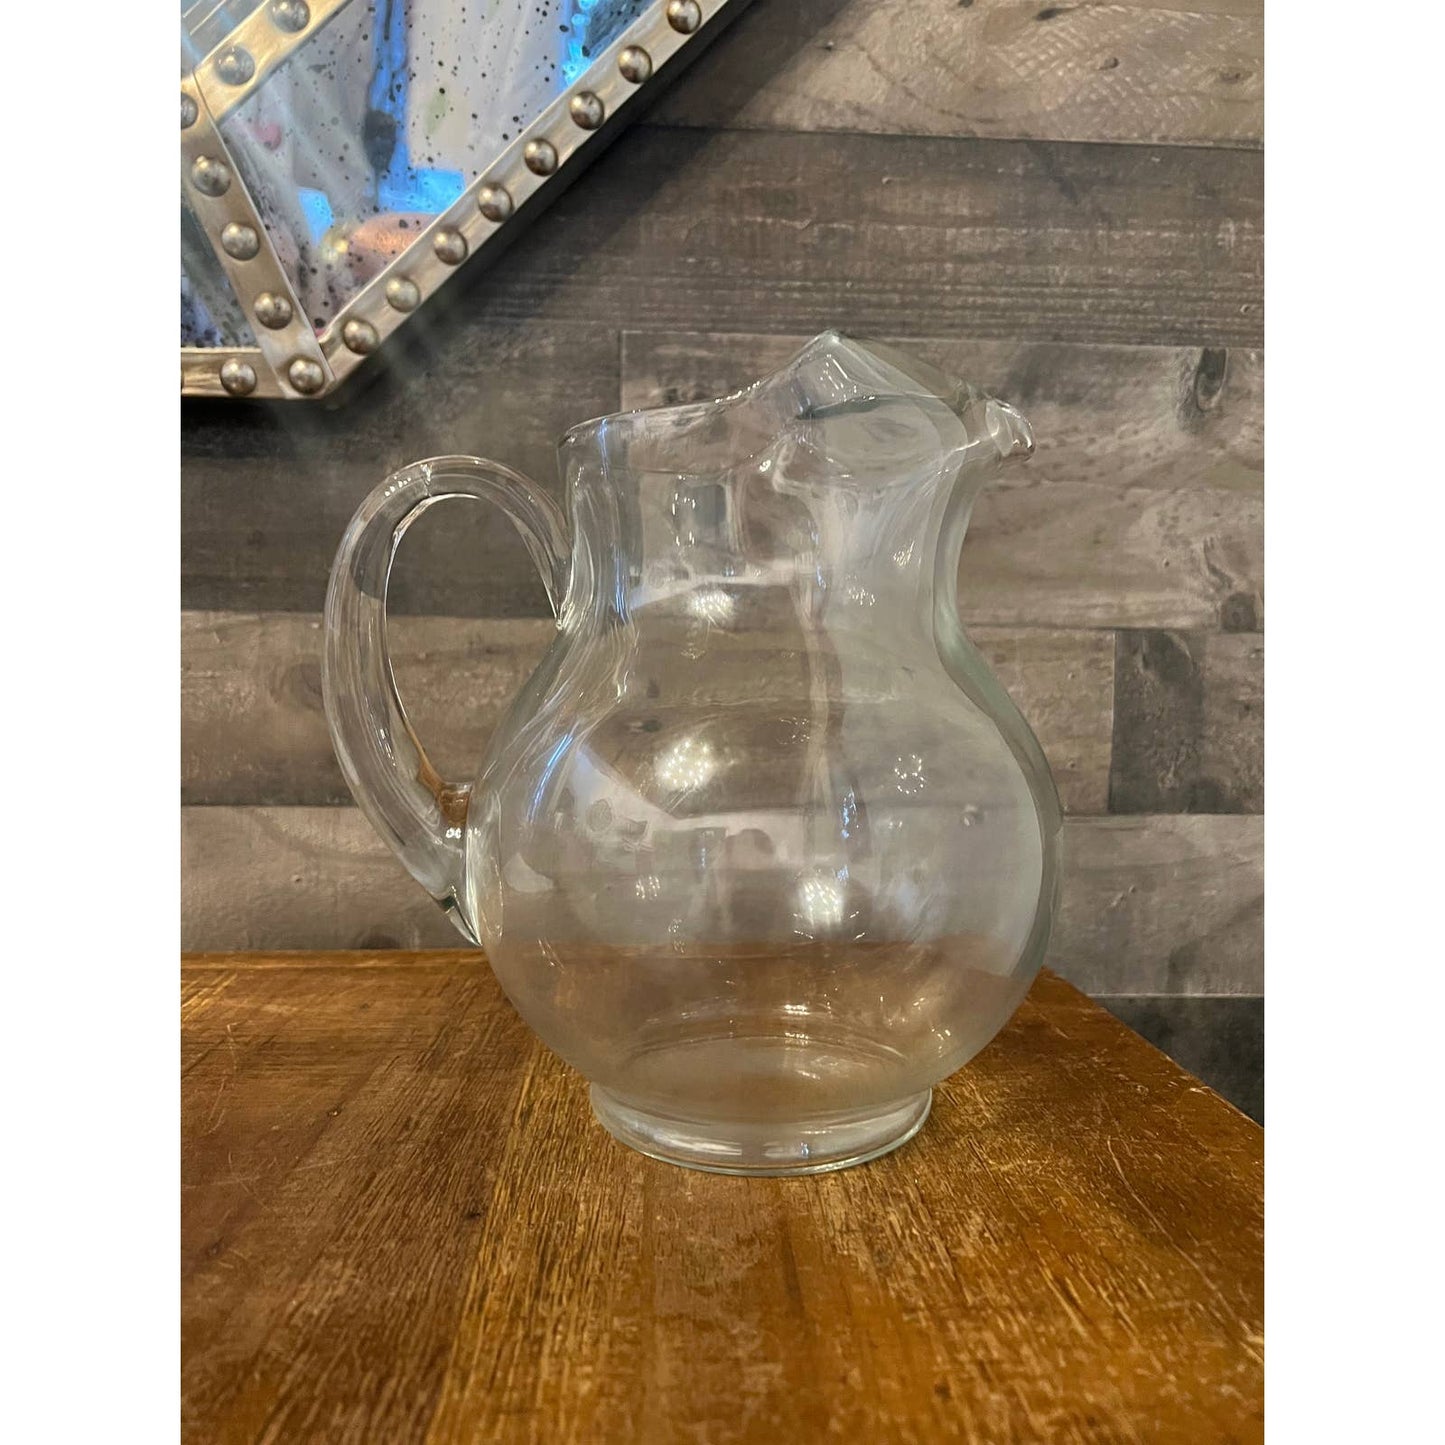 Clear glass bubbly handled beverage pitcher